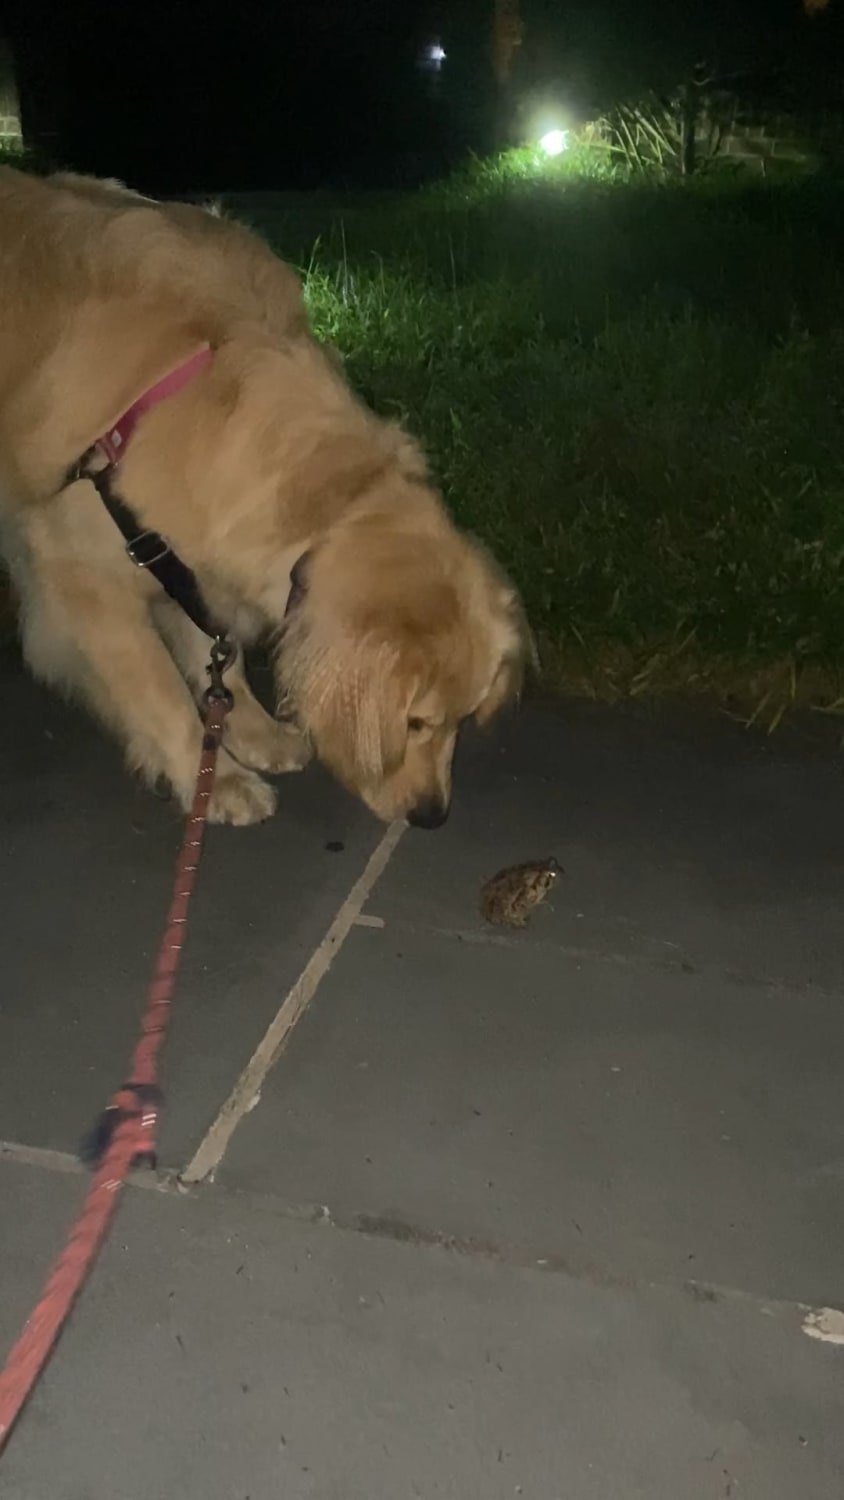 Found a frog and now we’re following it 🥺